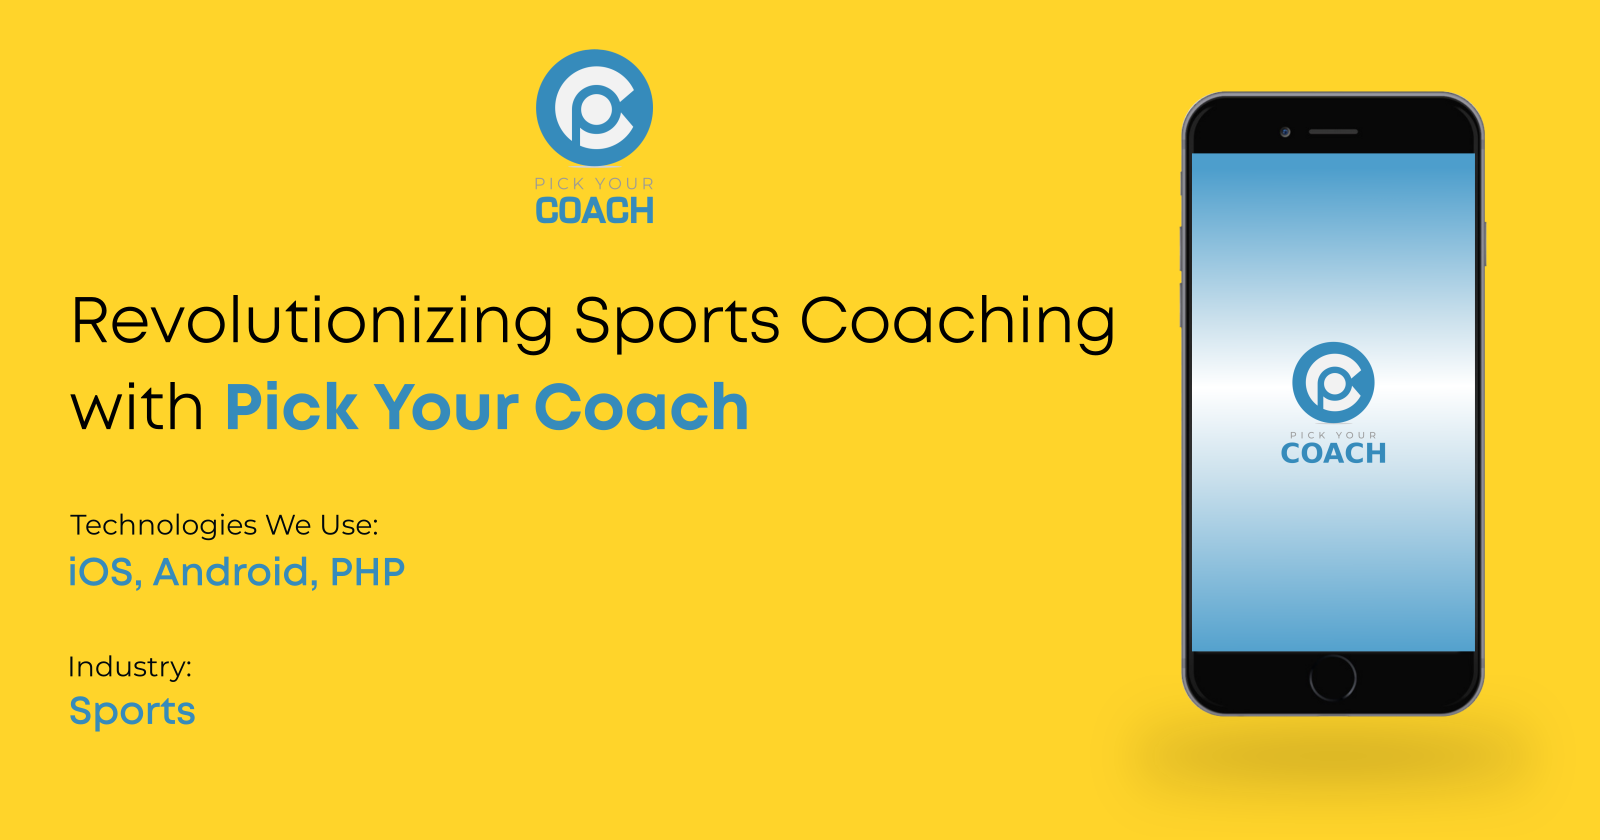 Revolutionizing Sports Coaching with “Pick your Coach”